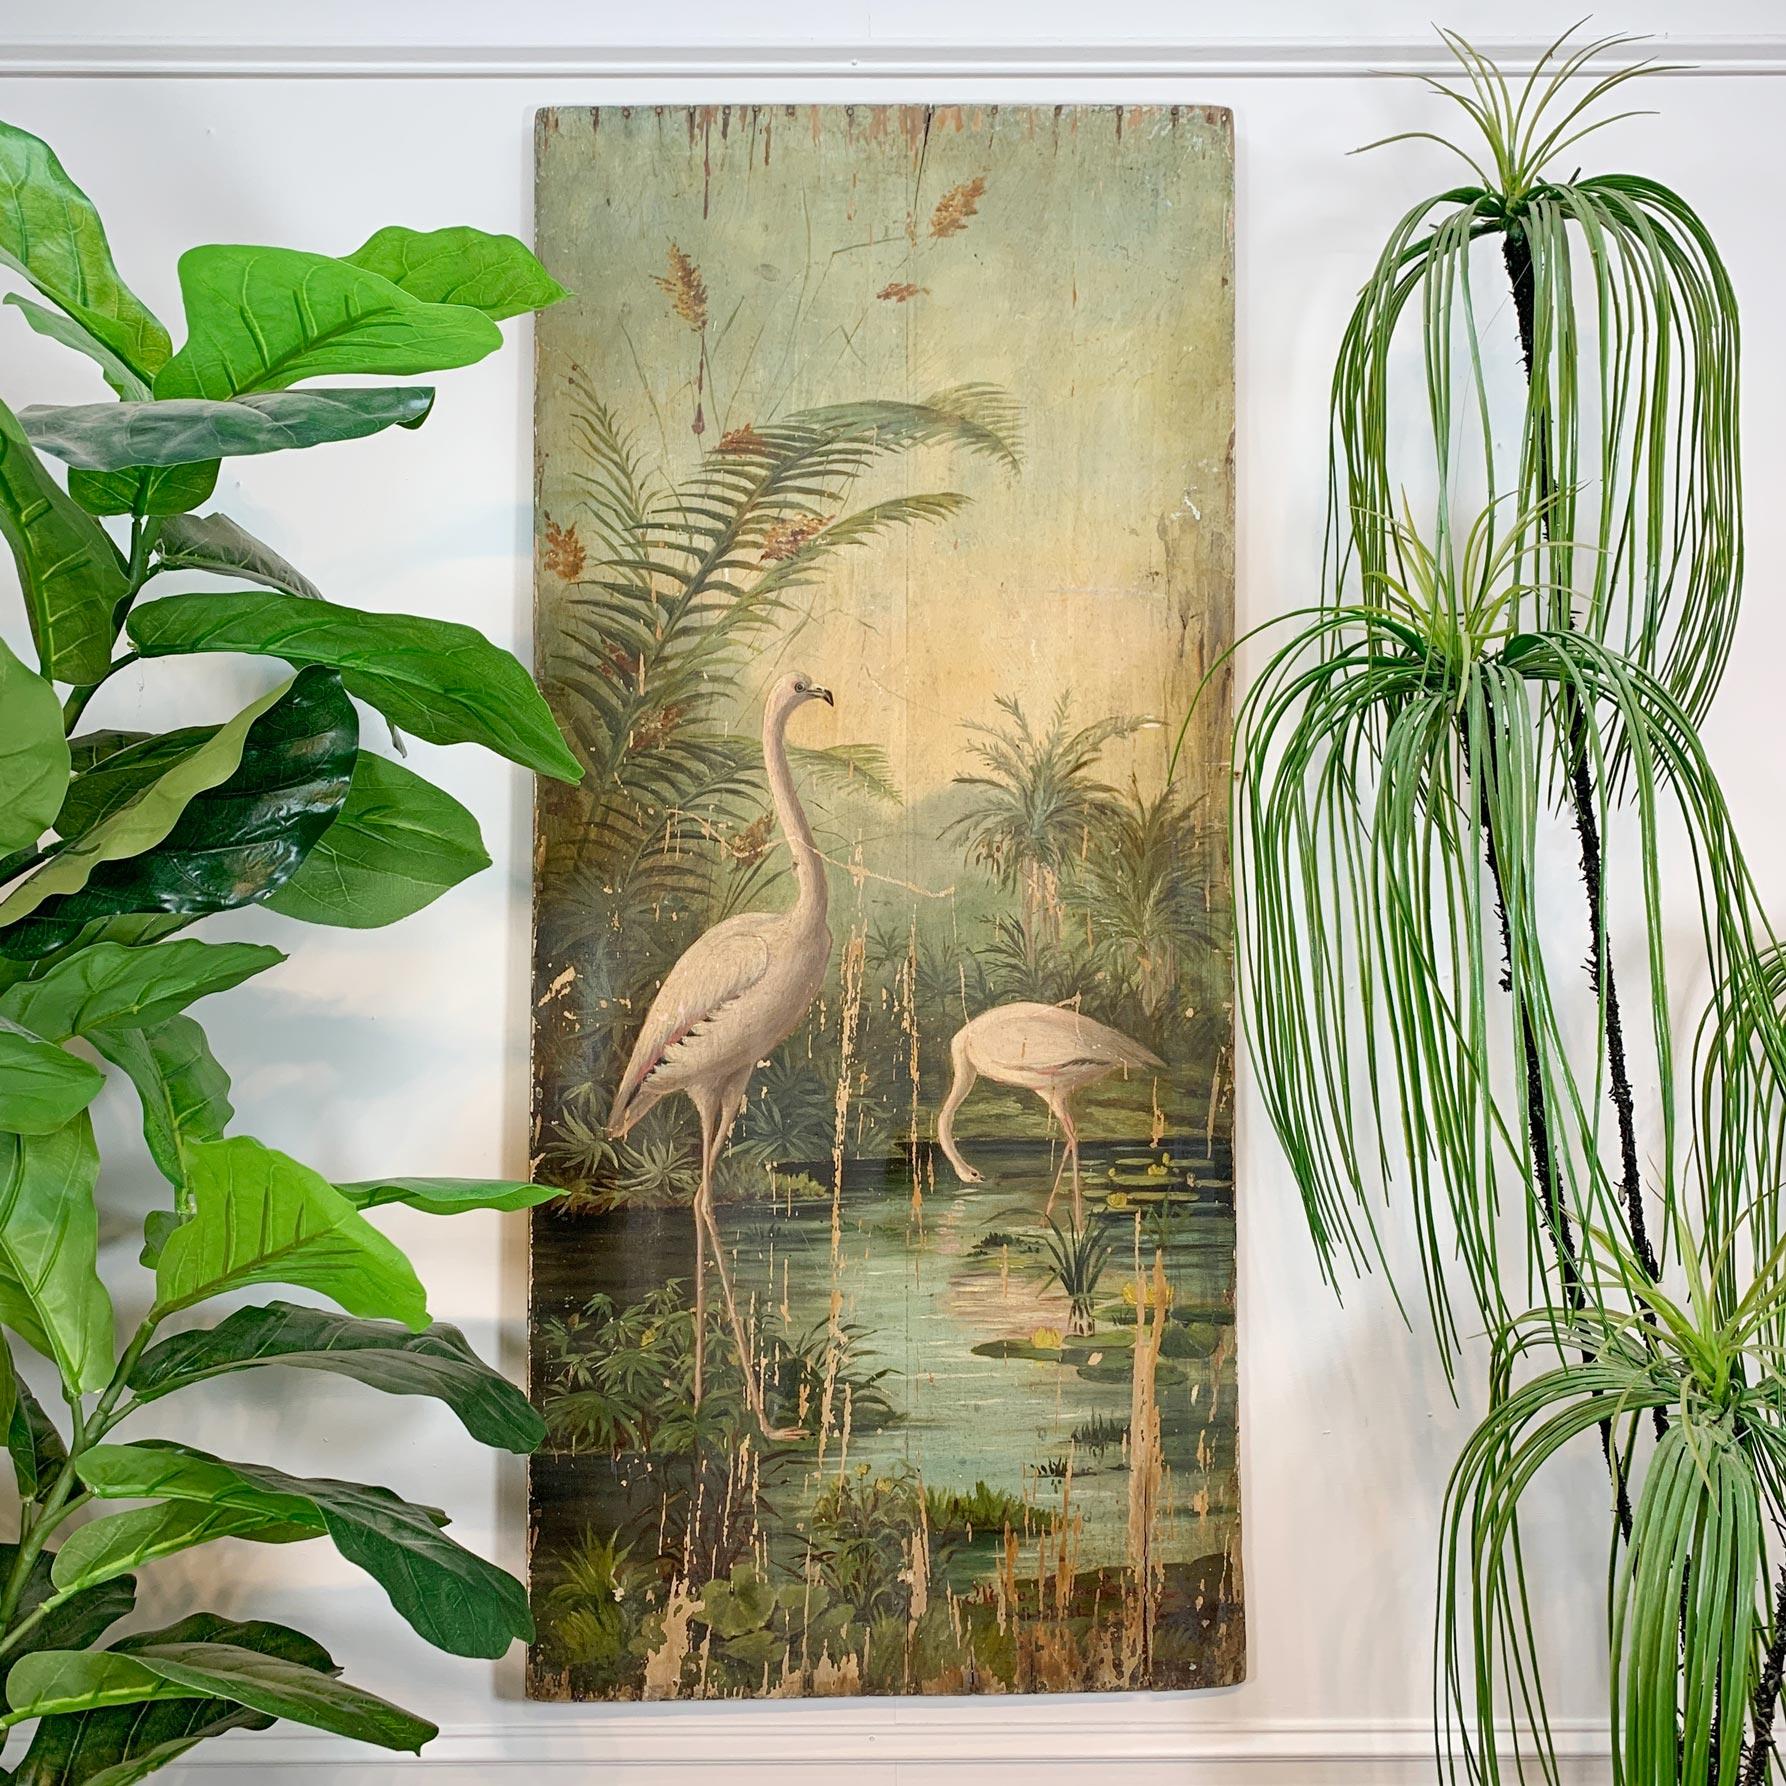 Beautifully painted study of a pair of Flamingos against a tropical setting, possibly the American everglades or Florida Keys, painted on board, signed and dated to the right corner but paint loss has made this impossible to decipher.

Obvious signs